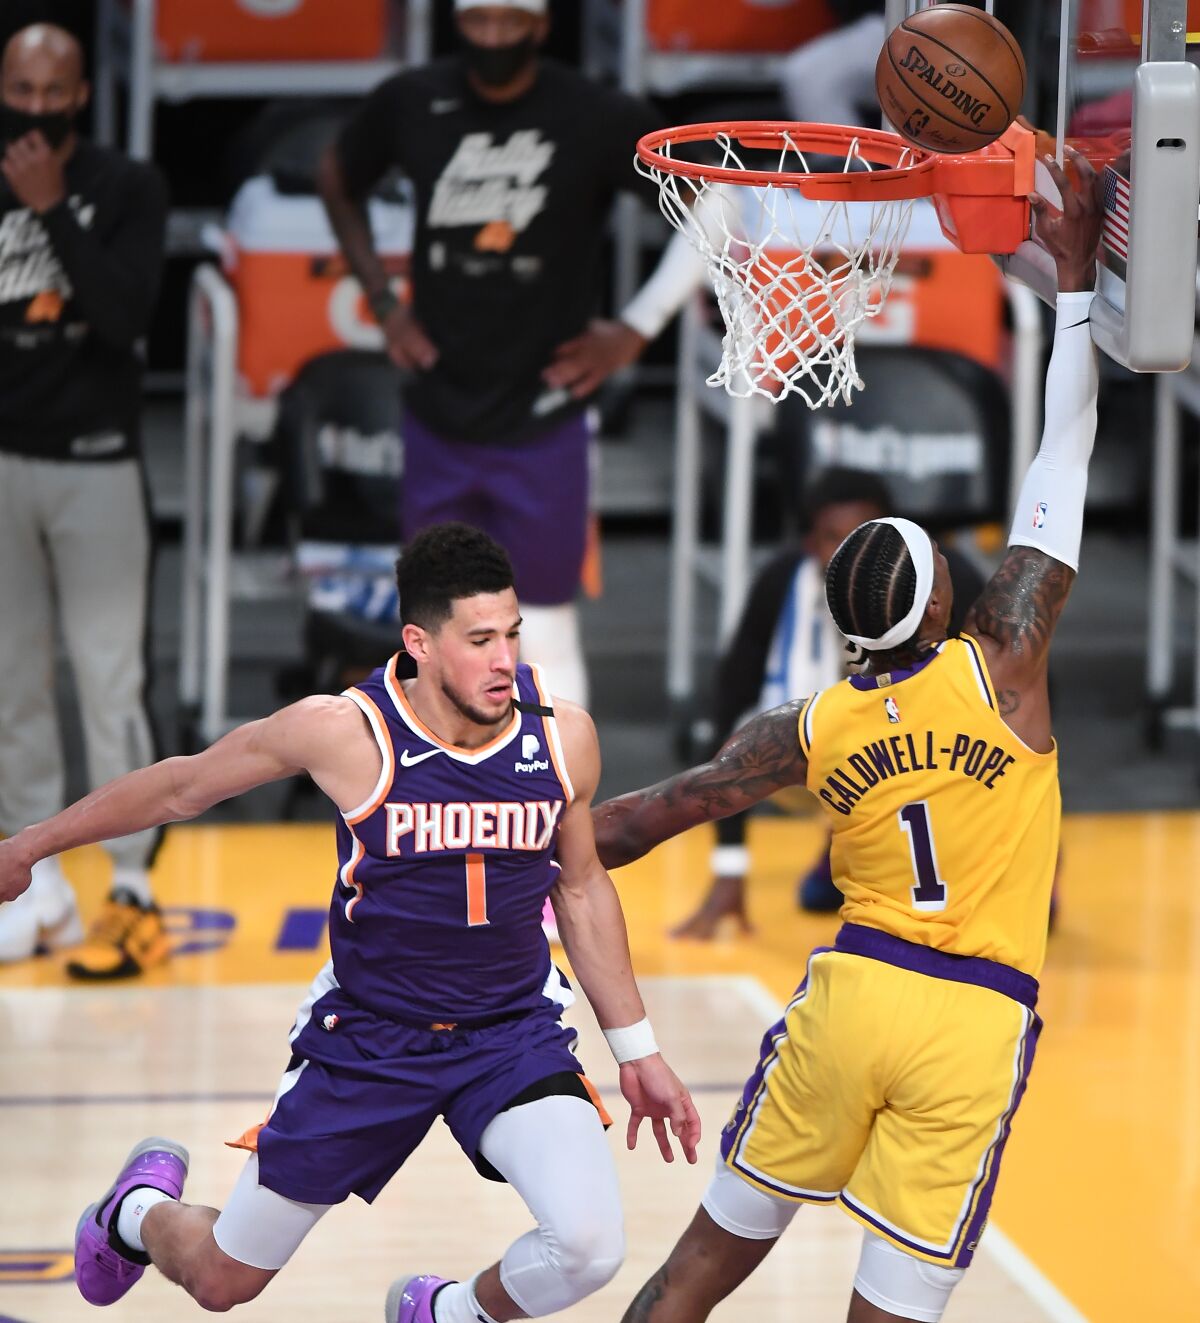 Lakers guard Kentavious Caldwell-Pope scores a basket in front of Suns guard Devin Booker.